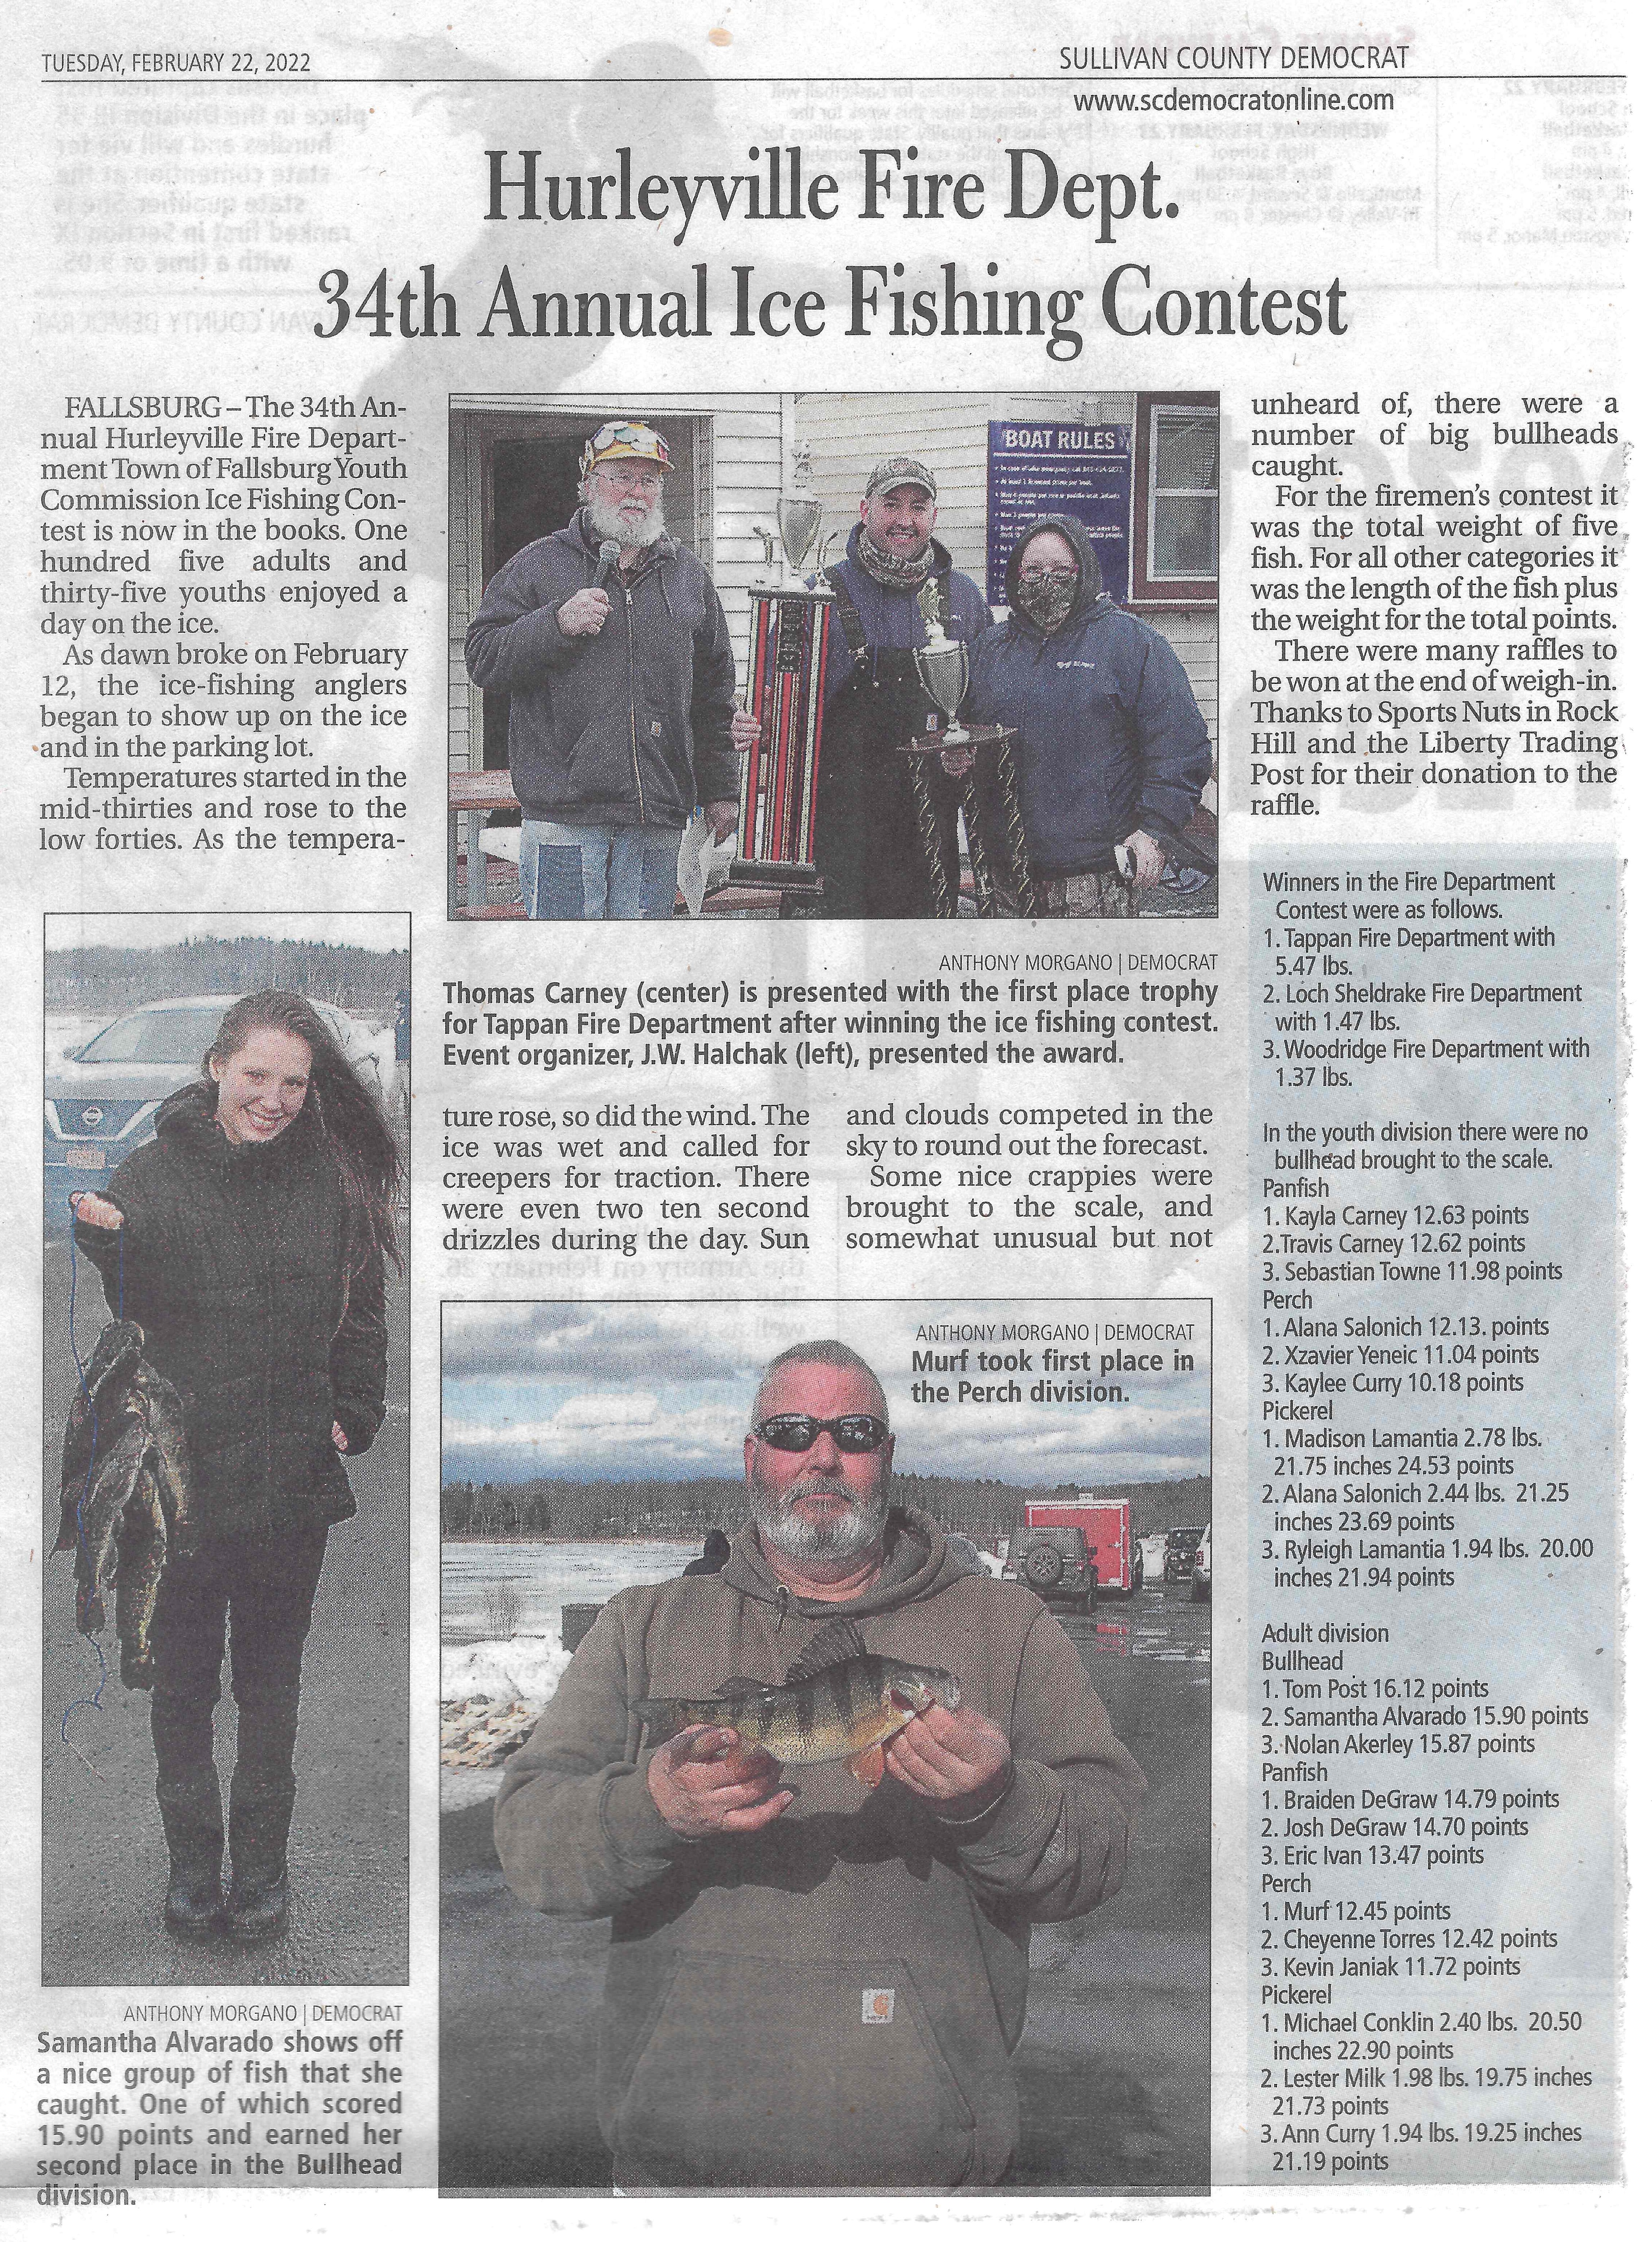 Sullivan County Democrat - After a relatively mild winter, fishing